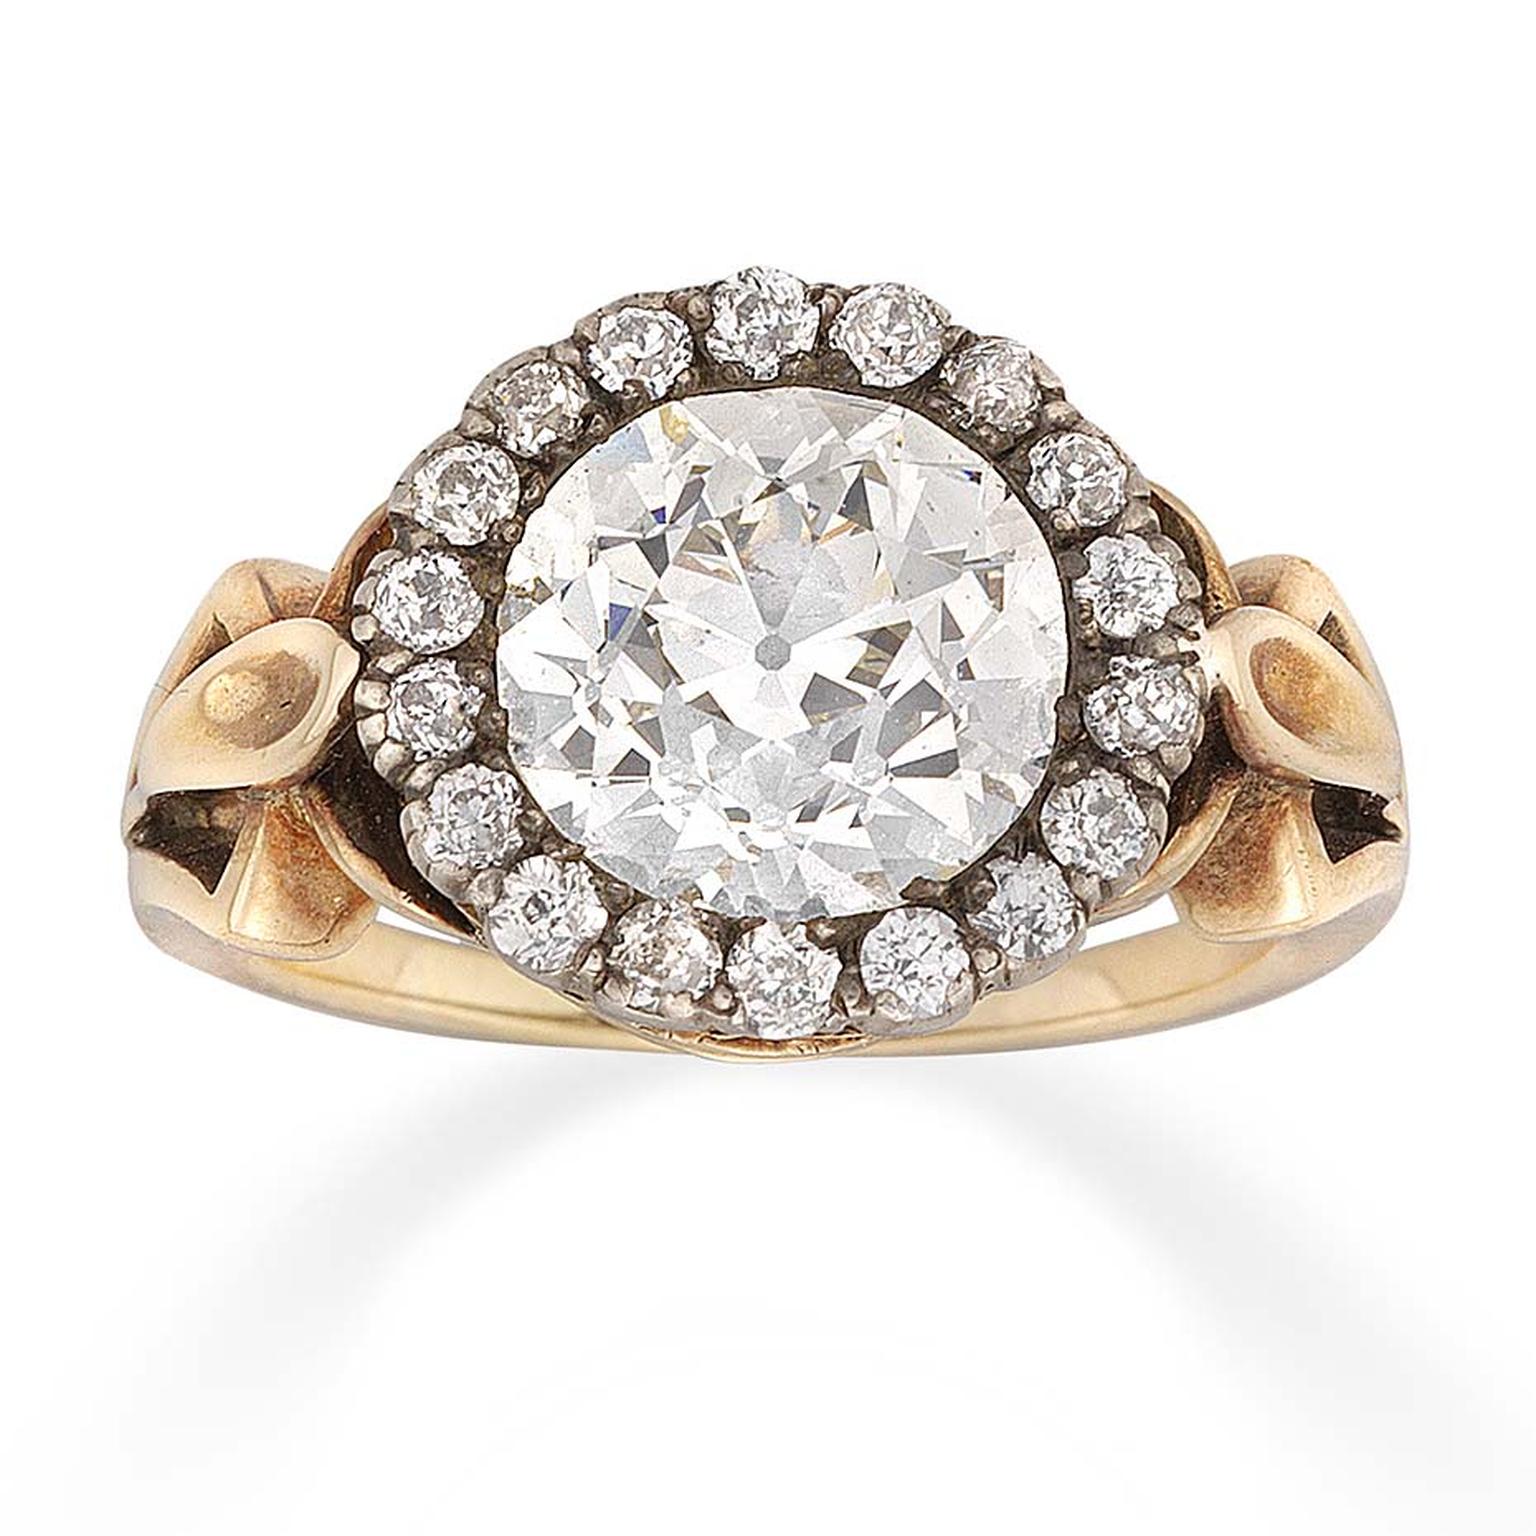 Bentley & Skinner diamond cluster Victorian engagement ring, dating from circa 1890, set with a large old-cut diamond in the centre of a gold mount, framed by old brilliant-cut diamonds.